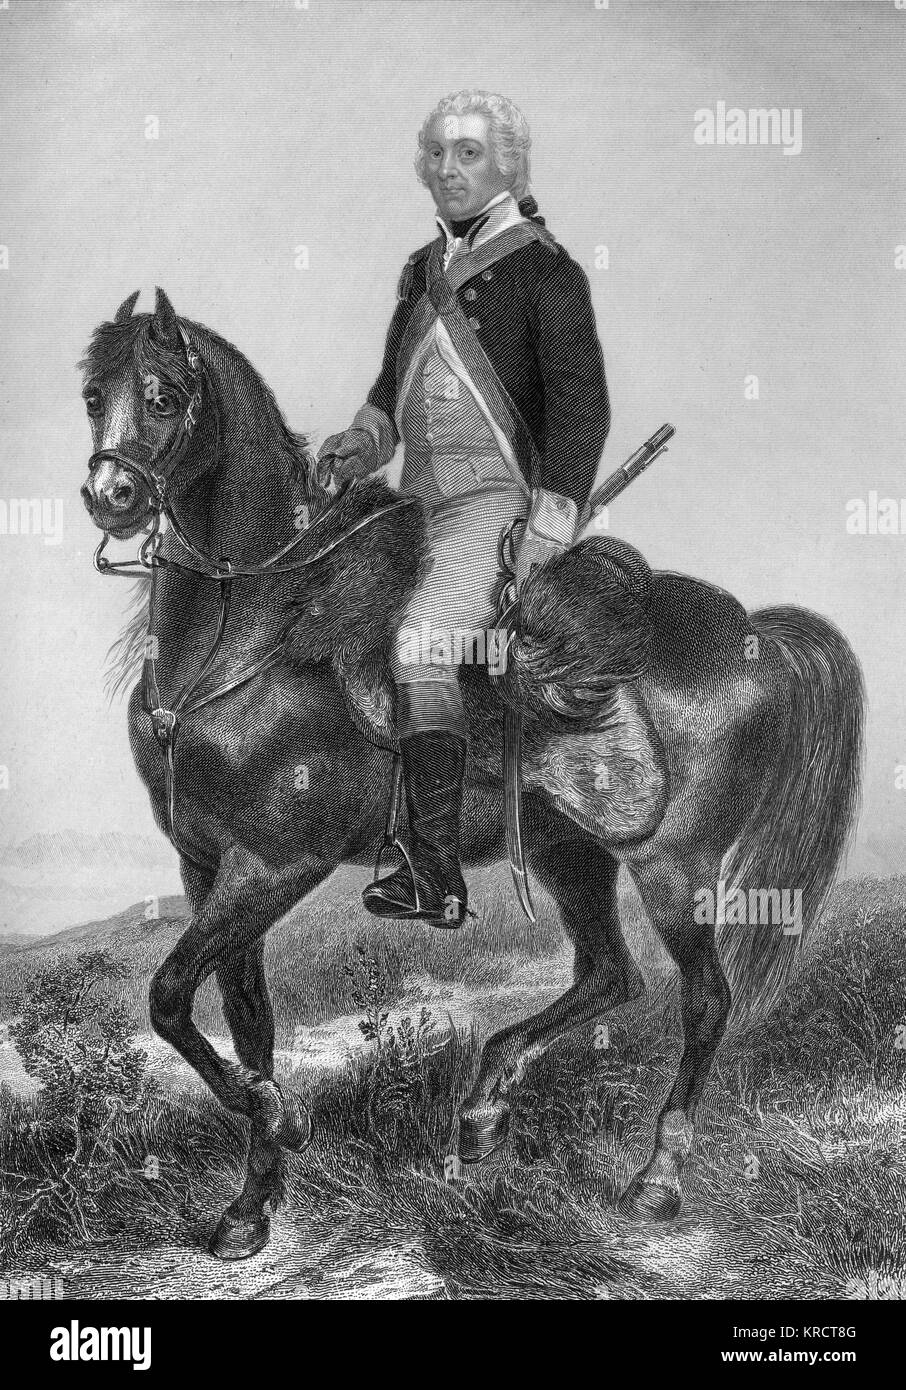 HENRY LEE known as 'Light Horse Harry' American Revolutionary general and statesman, noted for eulogy of Washington ('First in war' etc) Date: 1756 - 1818 Stock Photo